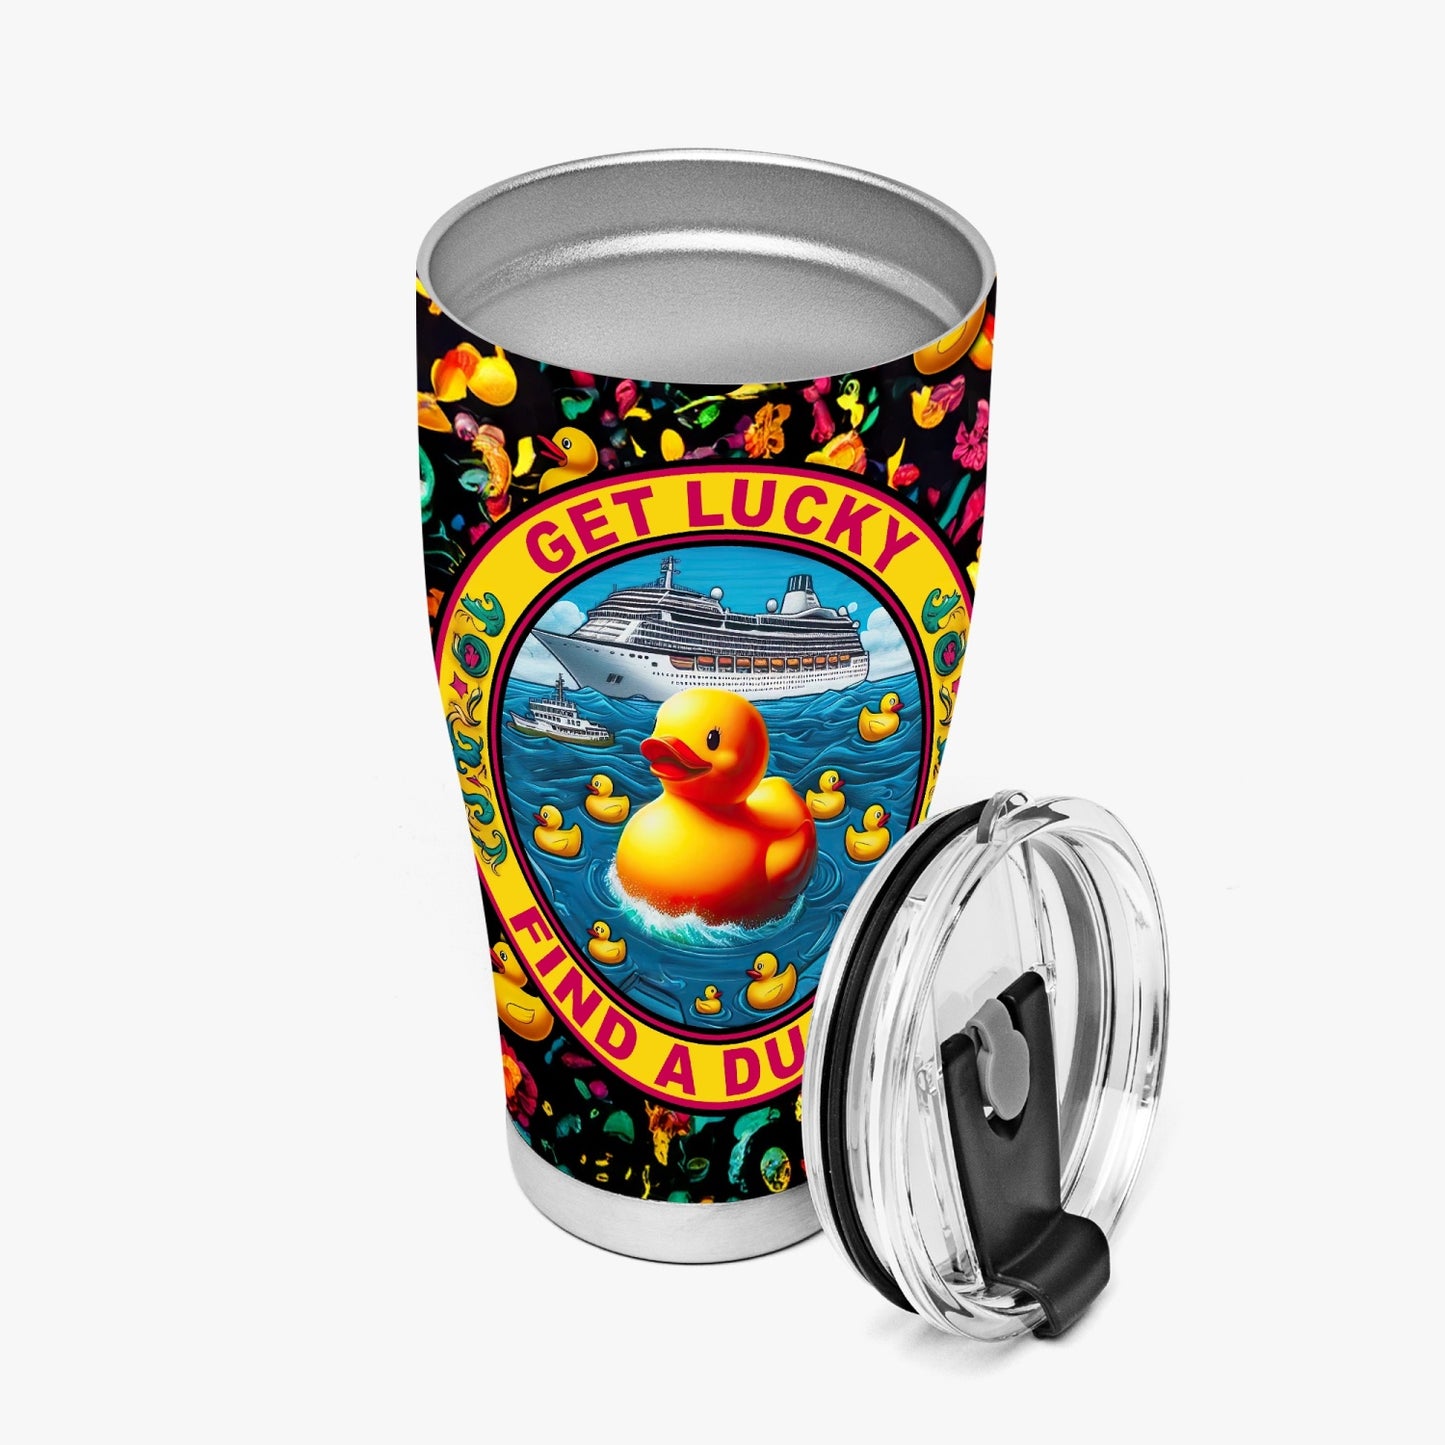 Get Lucky, Find a Ducky Stainless Steel Tumblers